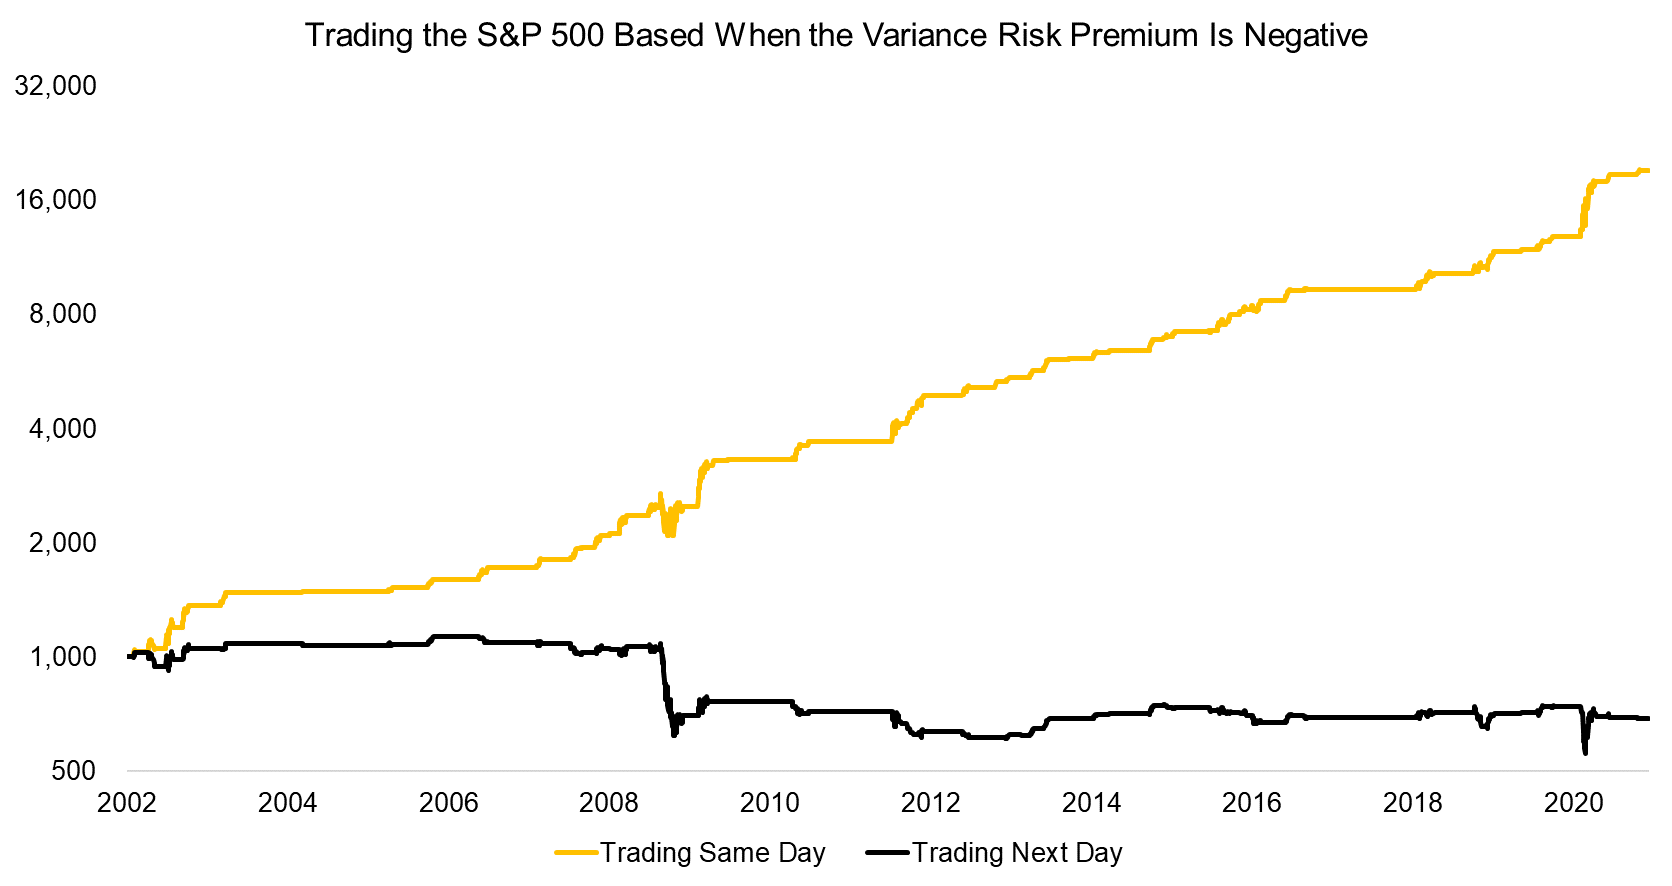 Trading the S&P 500 Based When the Variance Risk Premium Is Negative